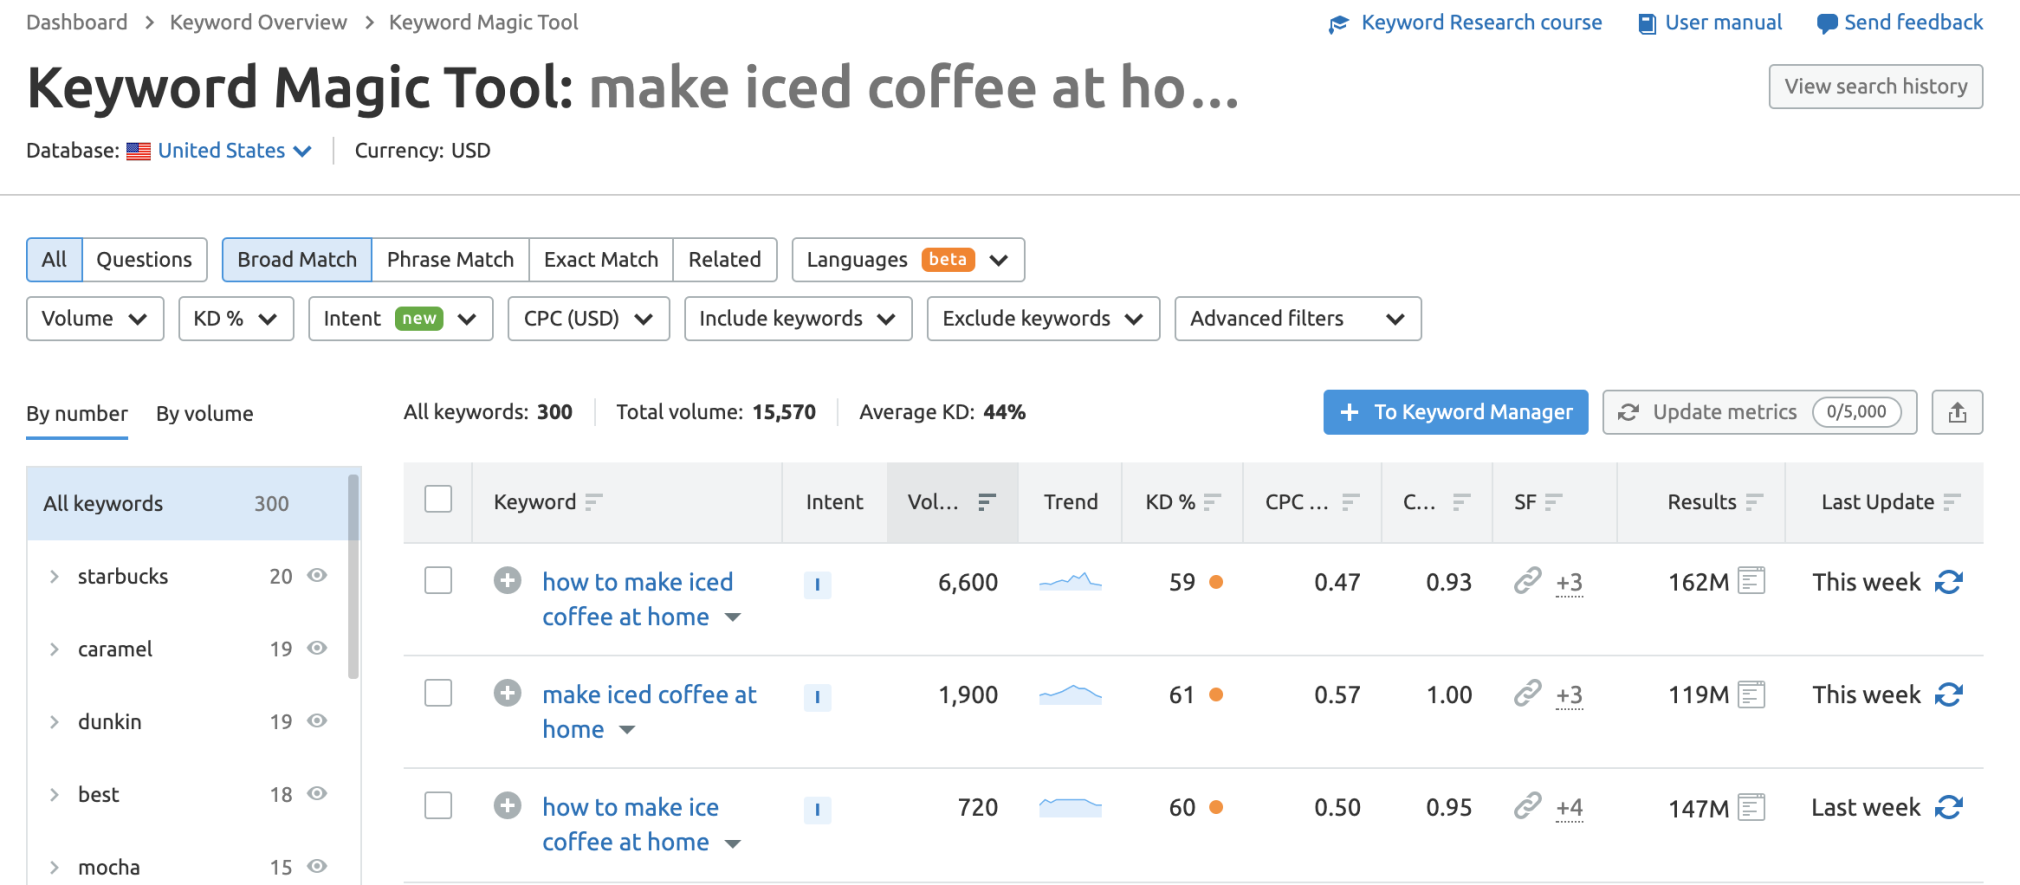 results in semrush in keyword magic tool for term "iced coffee"